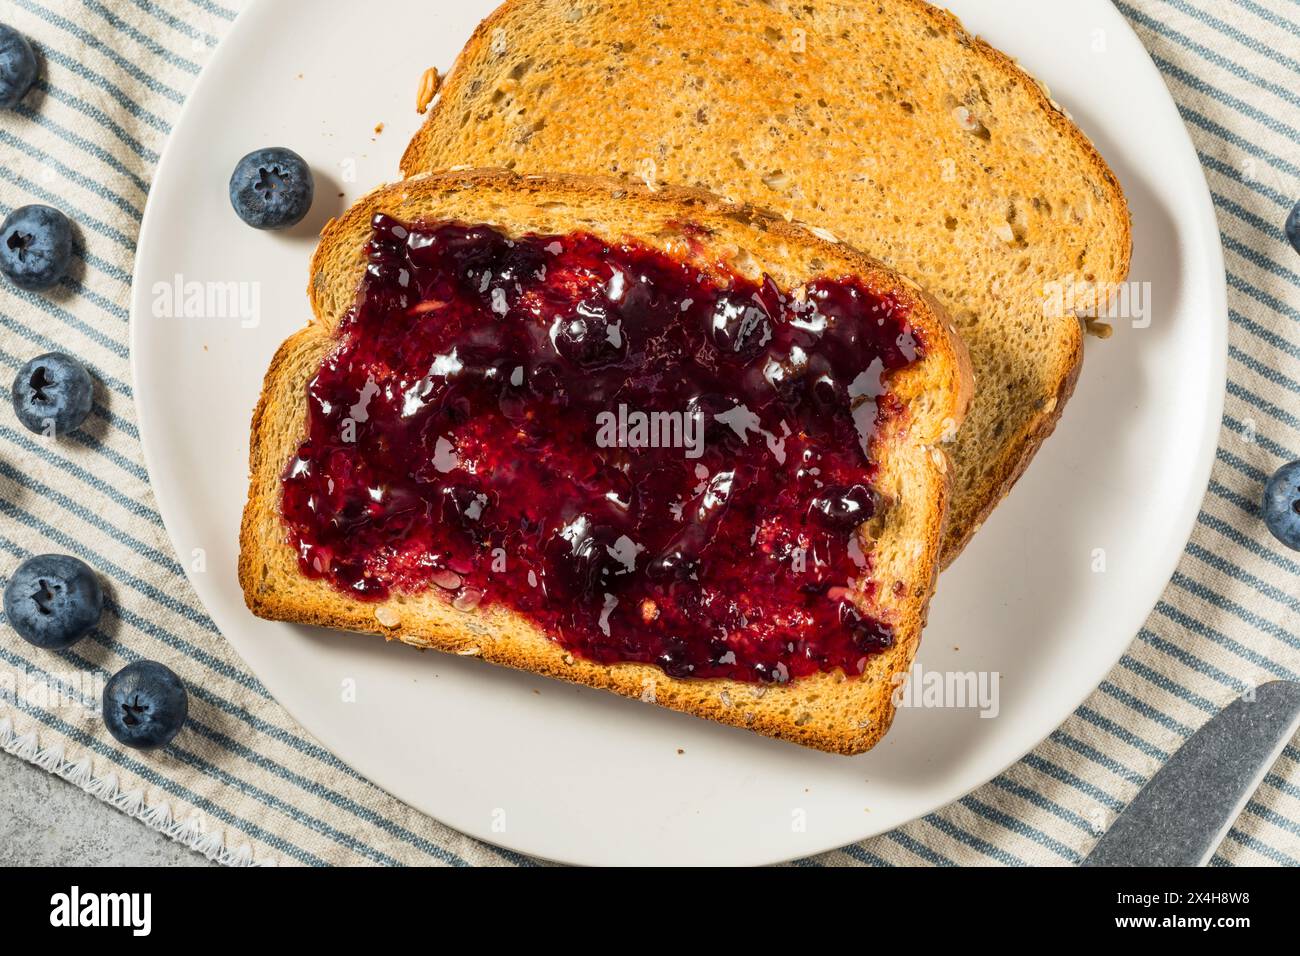 Healthy Homemade Blueberry Jam and Toast for Breakfast Stock Photo